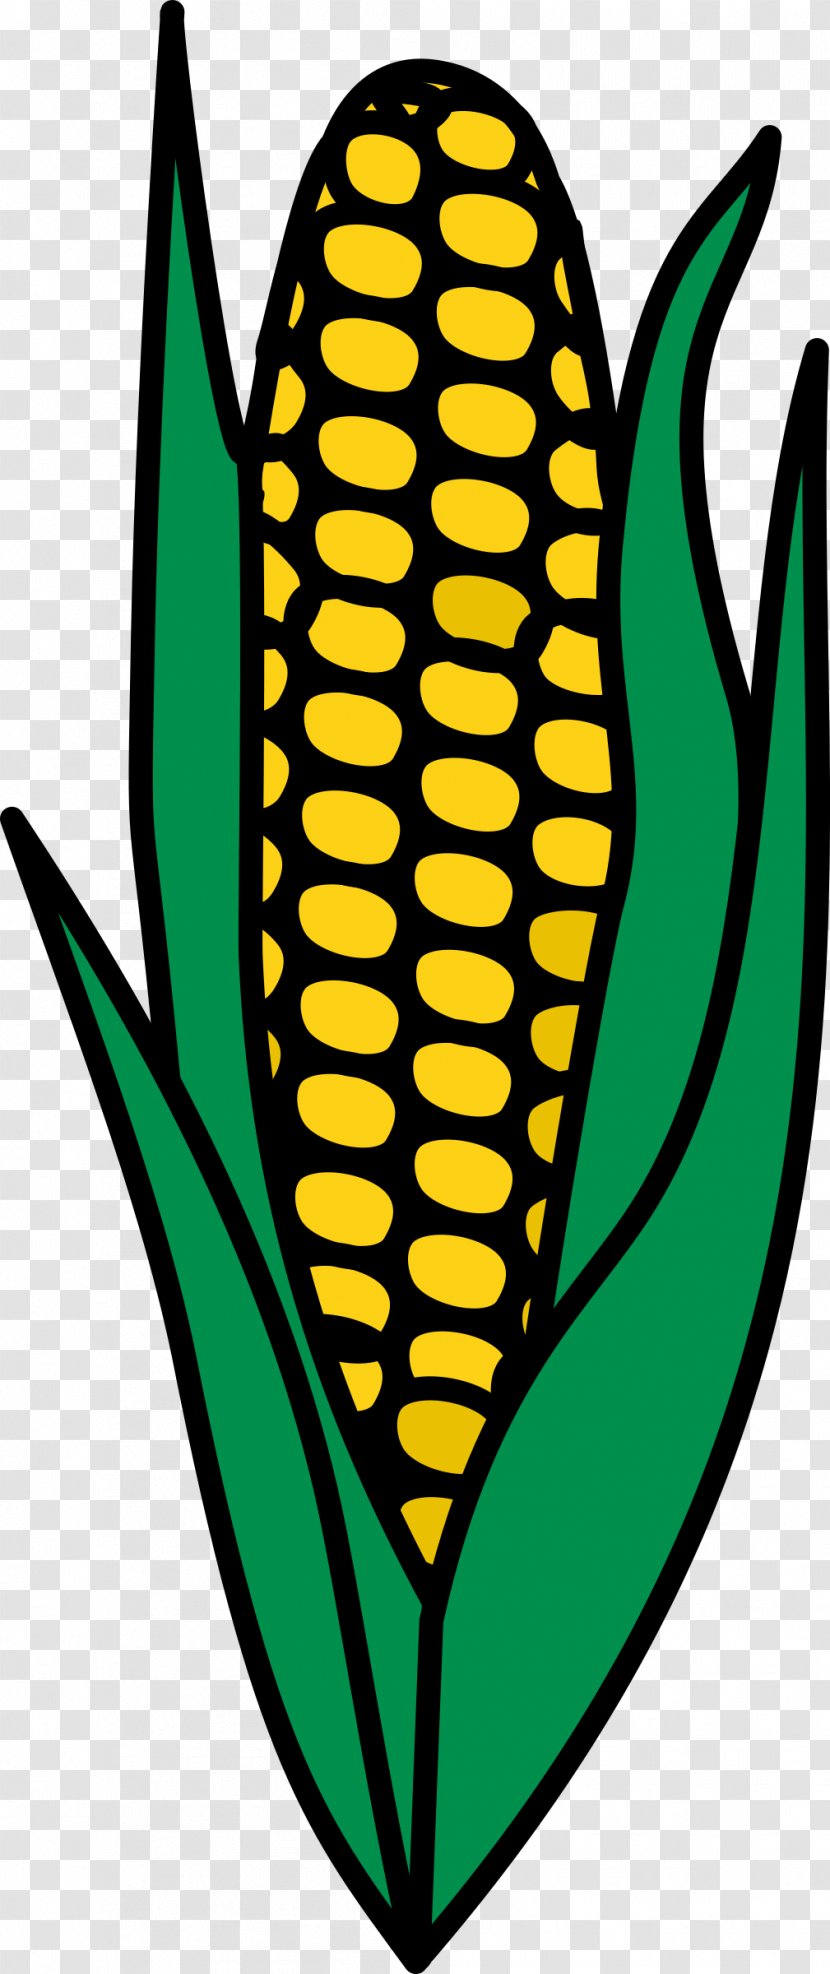 Corn On The Cob Maize Food Allergy Clip Art - Ingredient - Coat Of Arms Transparent PNG